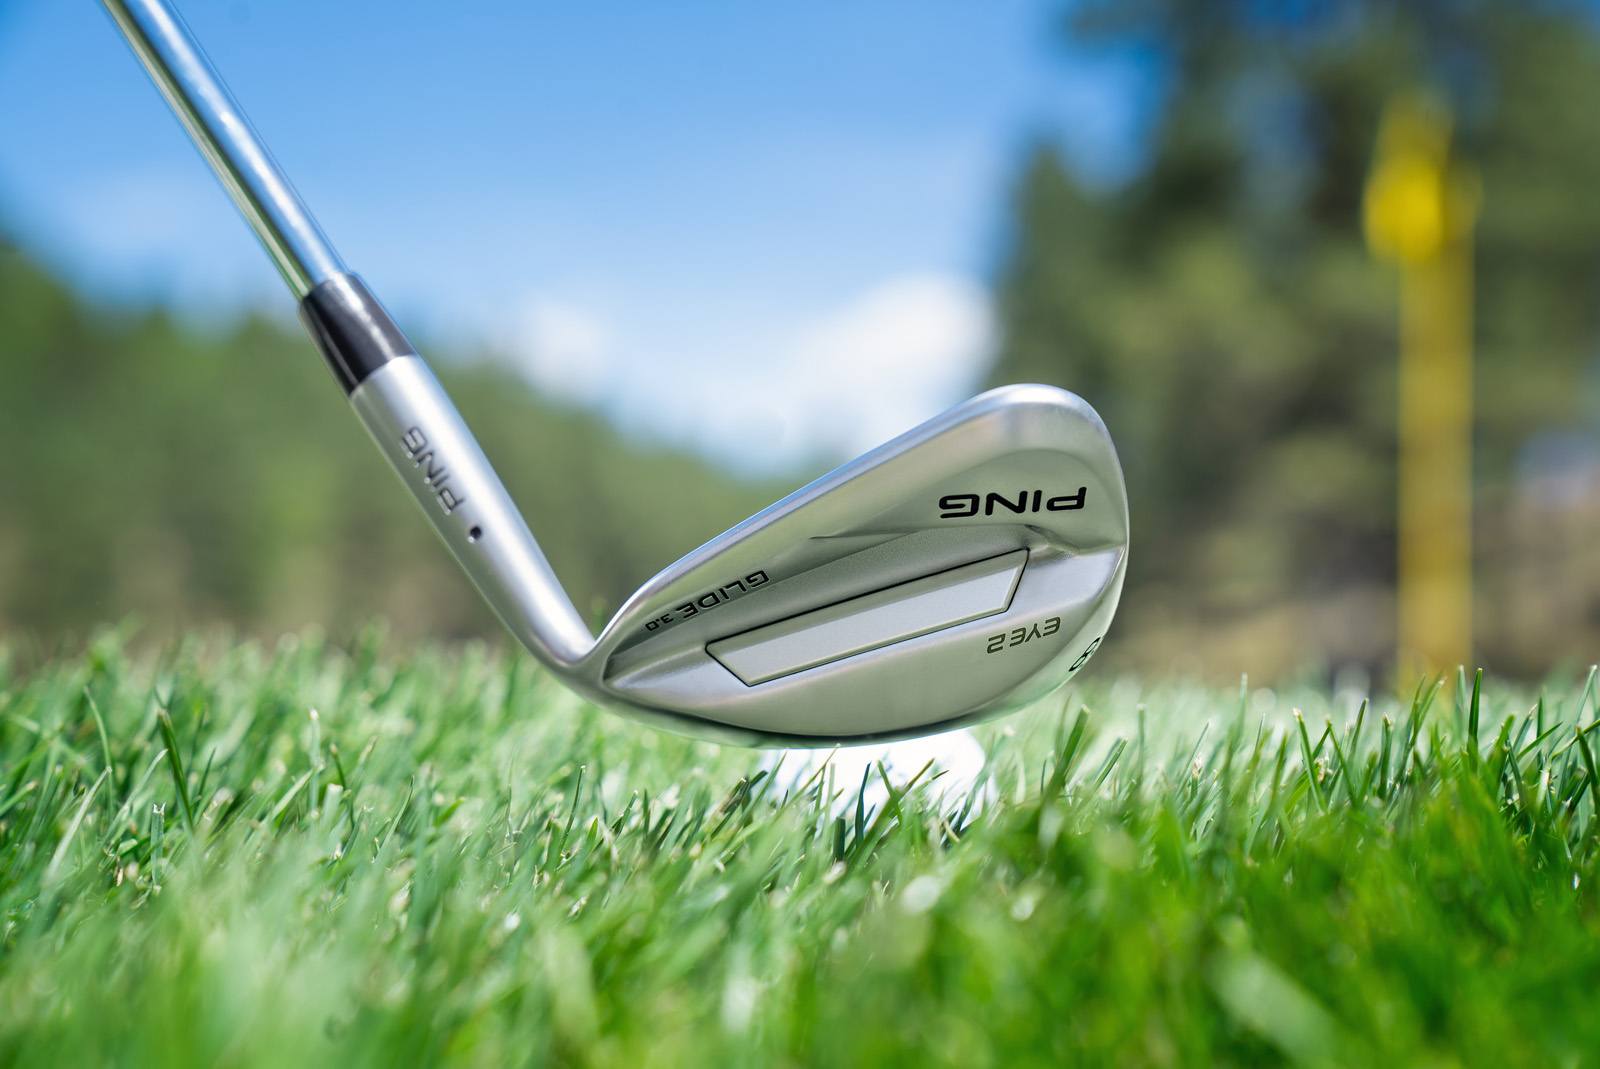 PING Glide 3.0 Wedges - The GOLFTEC Scramble